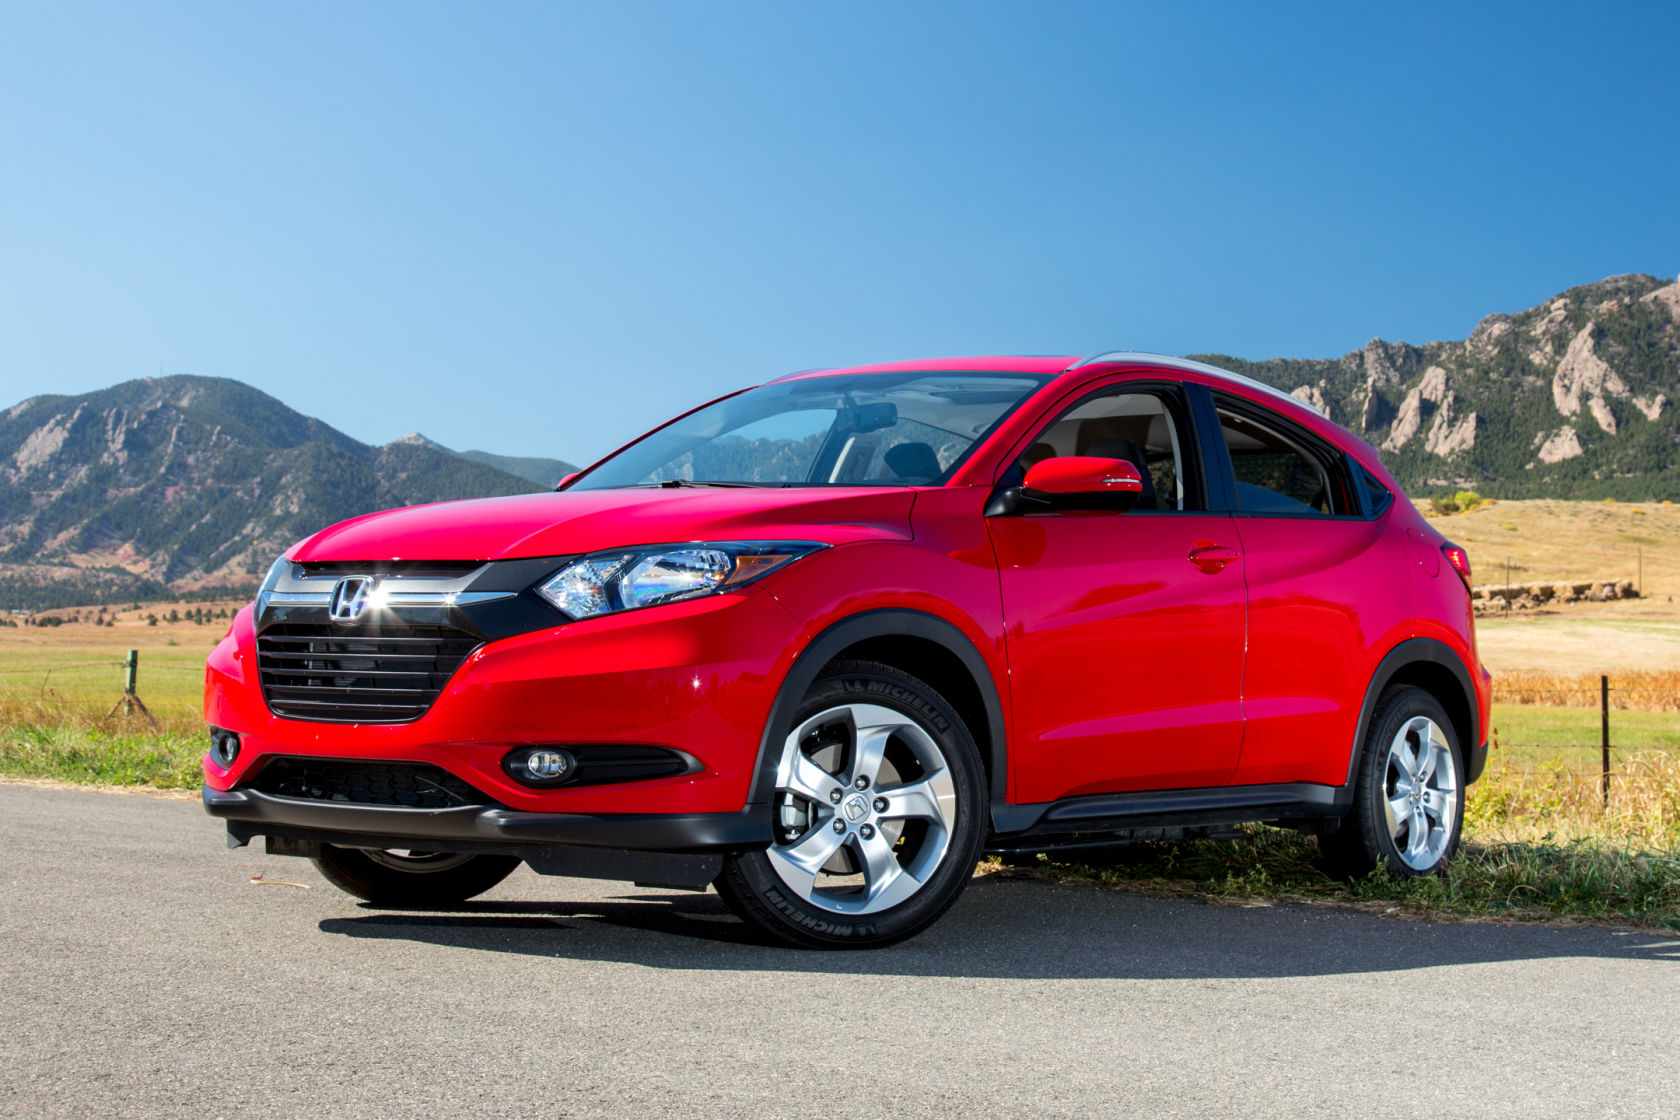 New Honda Hr V Suv Red Colors Image And Wallpaper